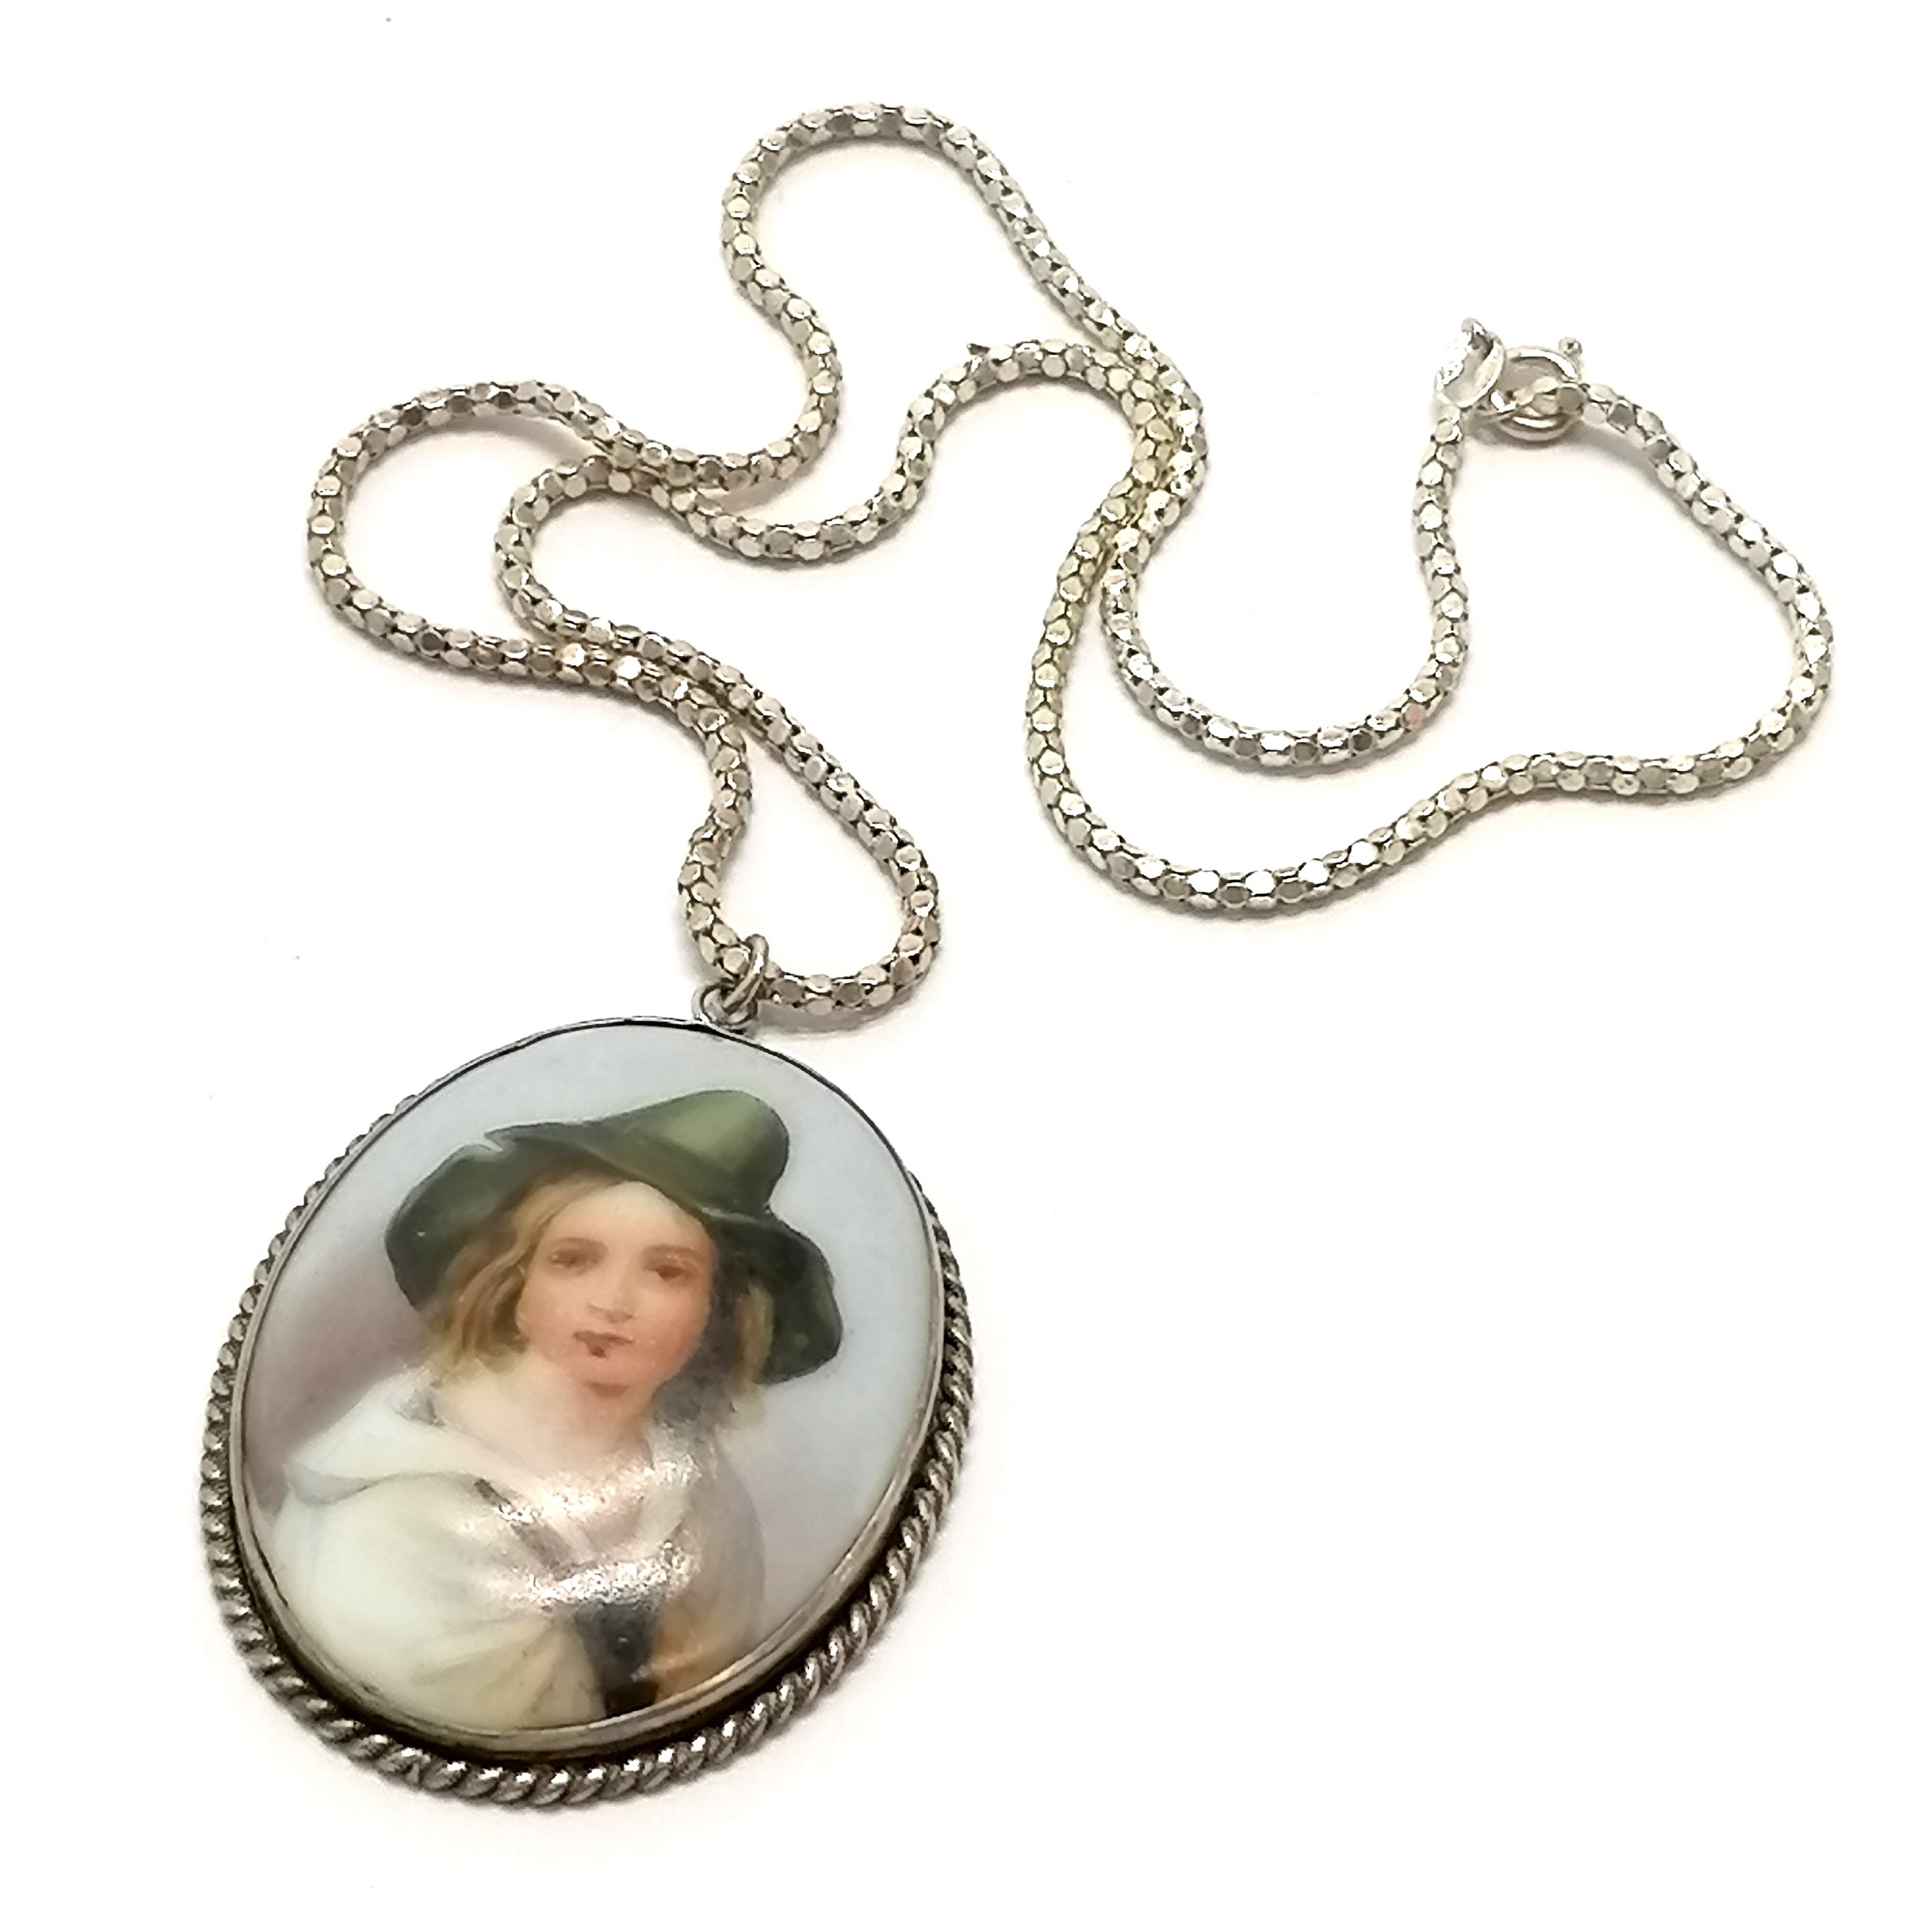 Antique unmarked silver mounted porcelain portrait panel pendant (5cm and chipped to the reverse) on